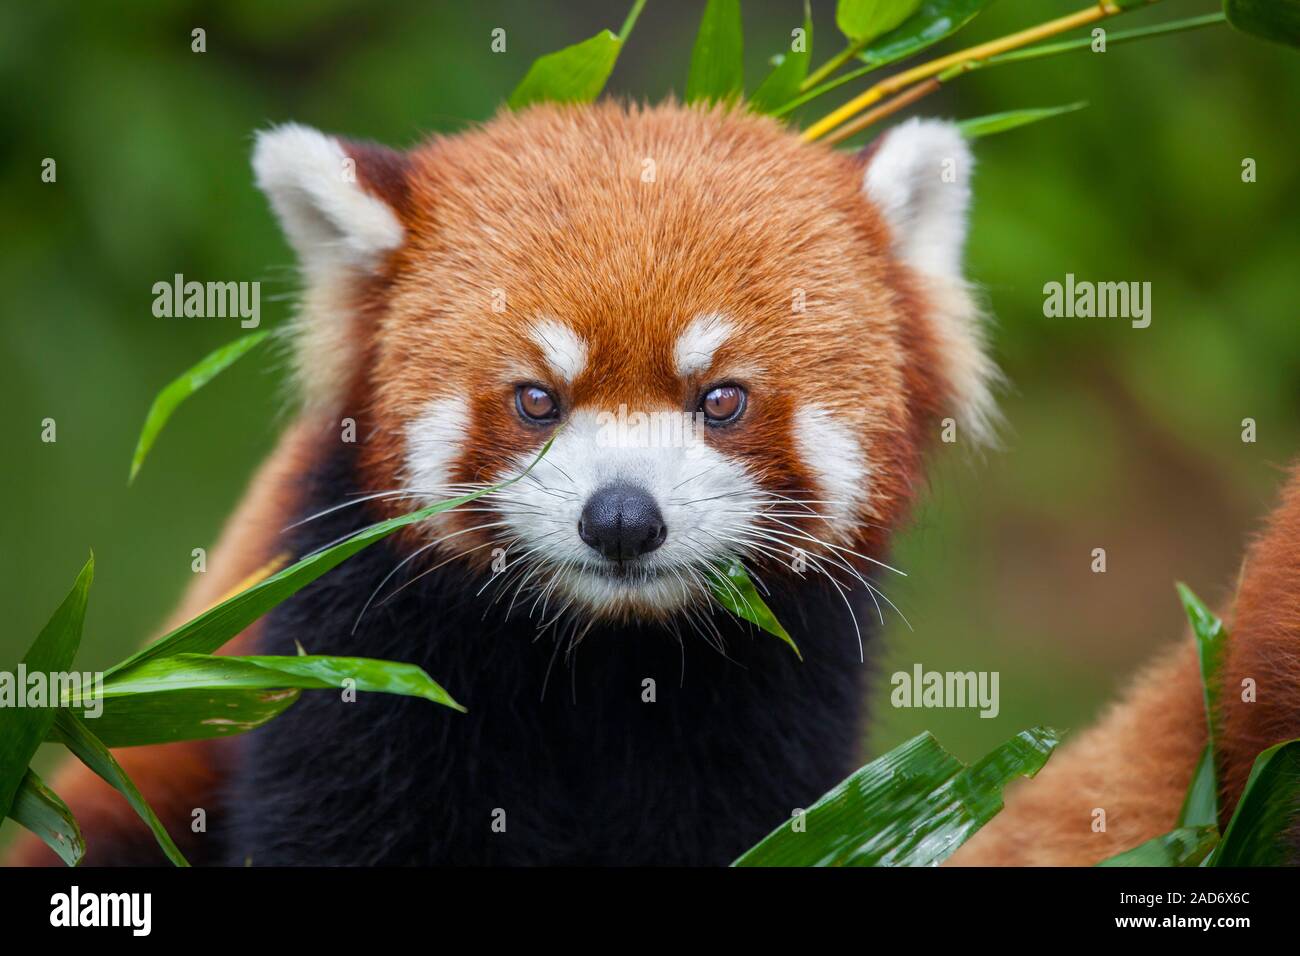 The Red Panda, Ailurus fulgens, or "shining cat", is a small mammal only species of the genus Ailurus. China Stock Photo - Alamy